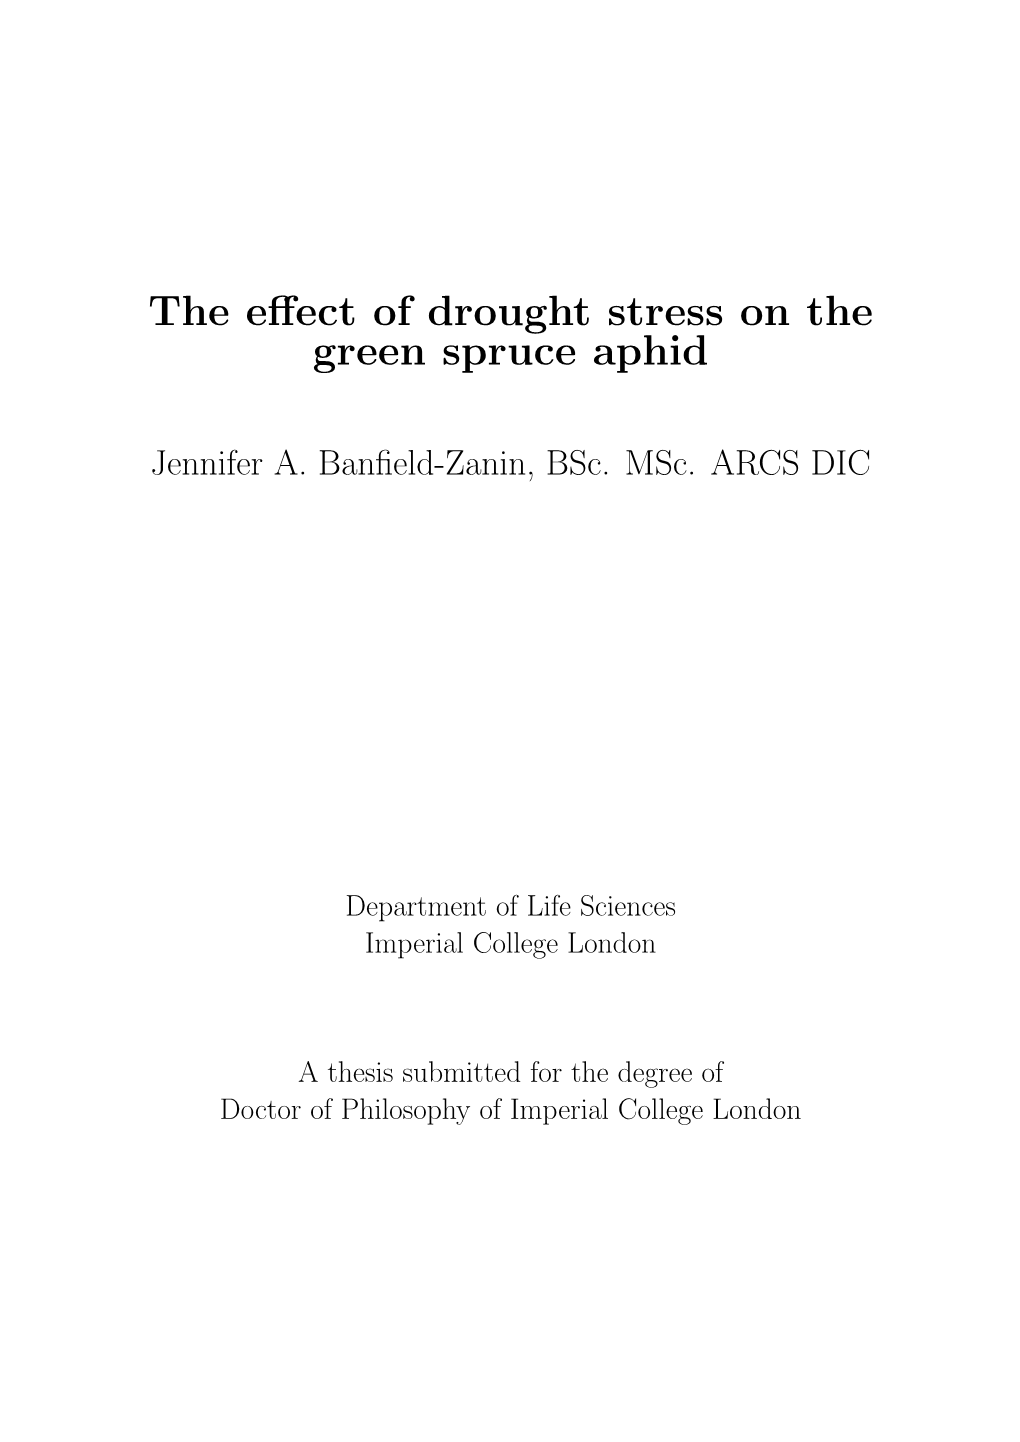 The Effect of Drought Stress on the Green Spruce Aphid